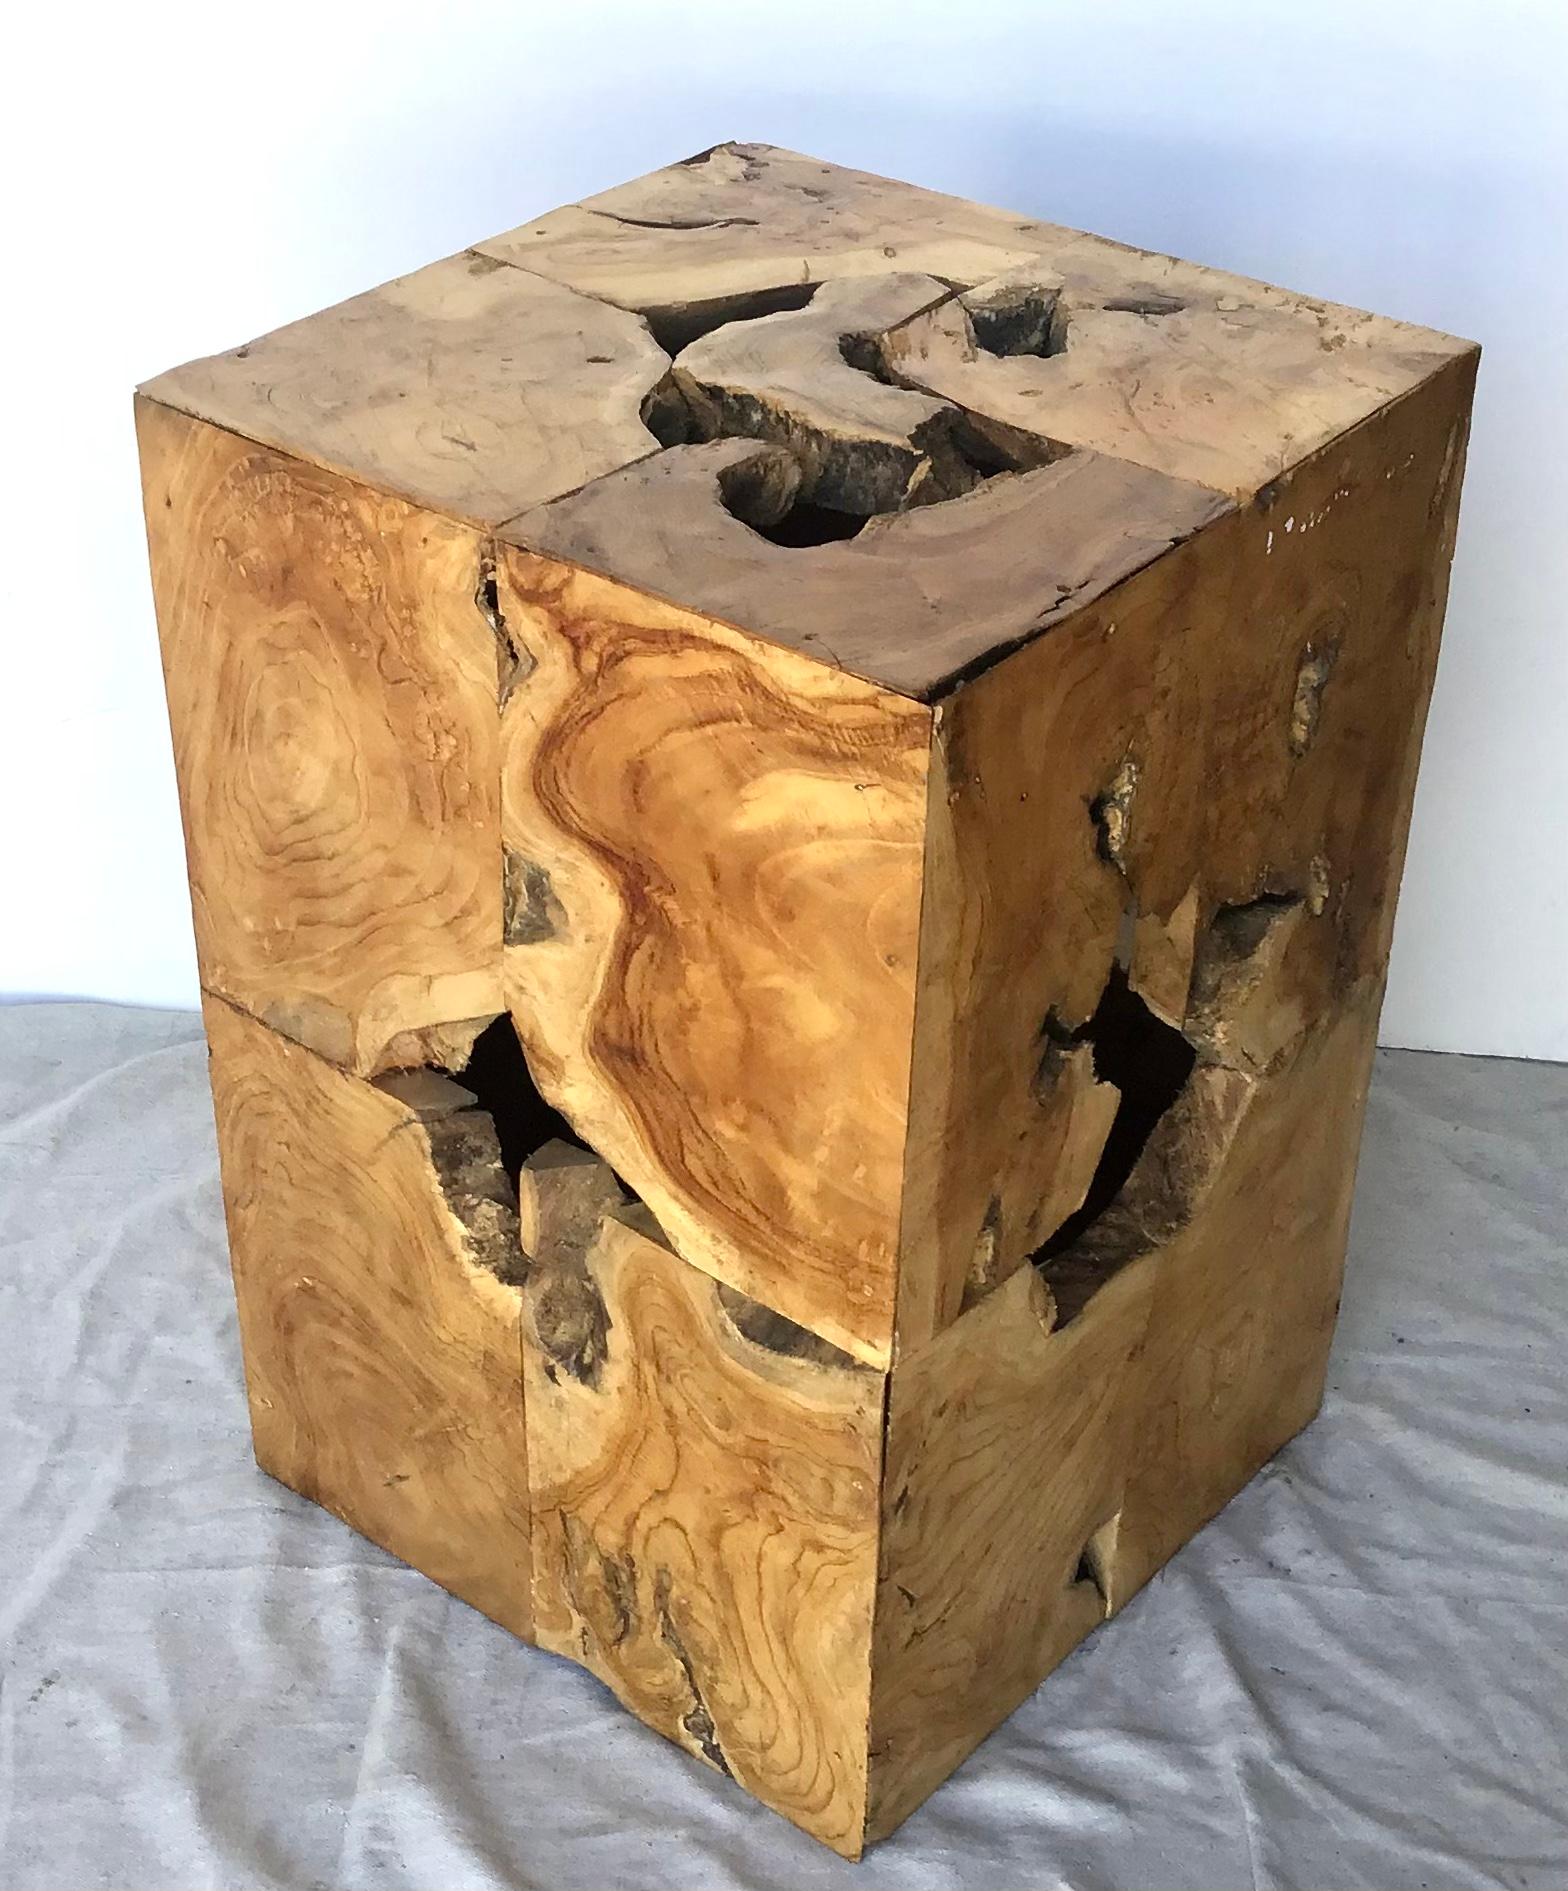 Nice burled wood column that can be used as a table or to display a sculpture. This rustic yet chic pedestal has been artisan created with a live-edge burl wood, with wonderful knobby bits, voids, and organic movement to it.  This burl wood pedestal